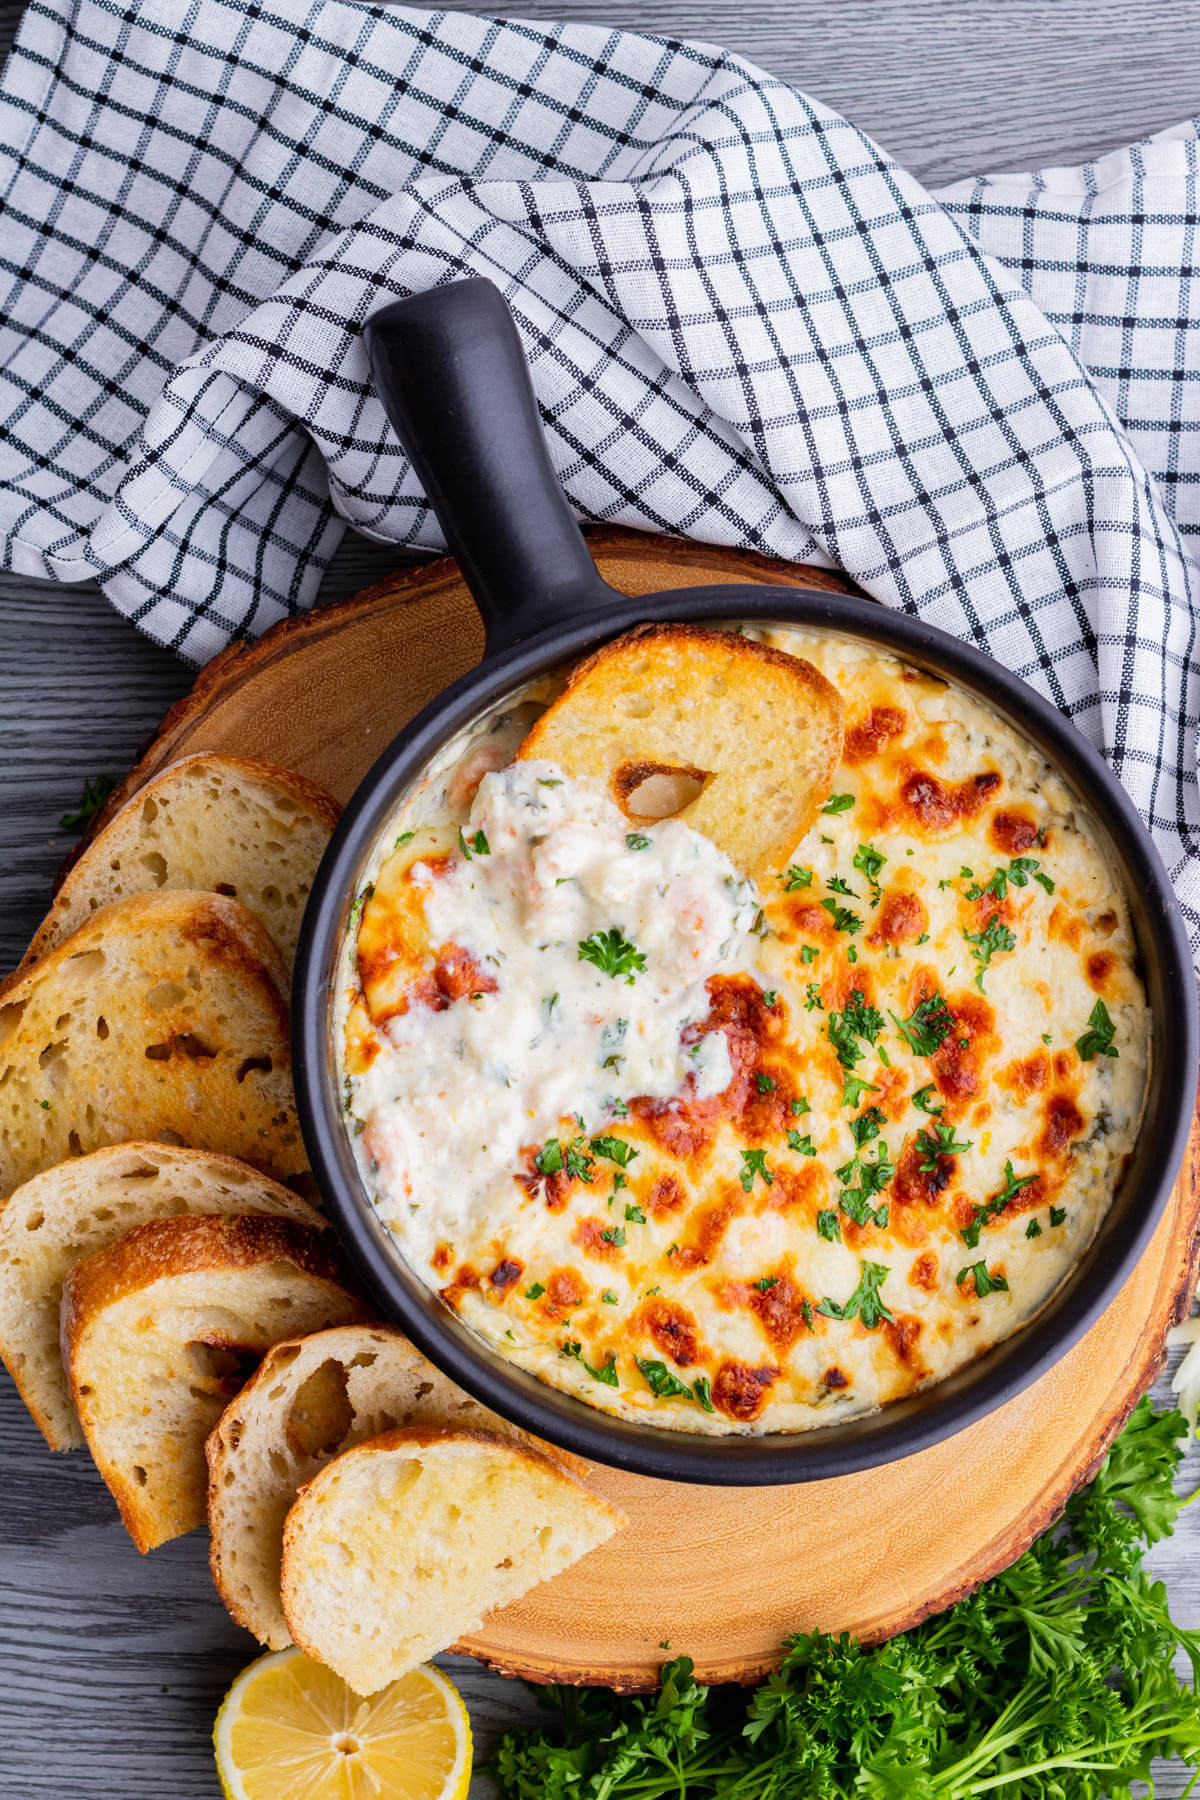 A slice of baguette dipped into cheesy shrimp scampi dip.